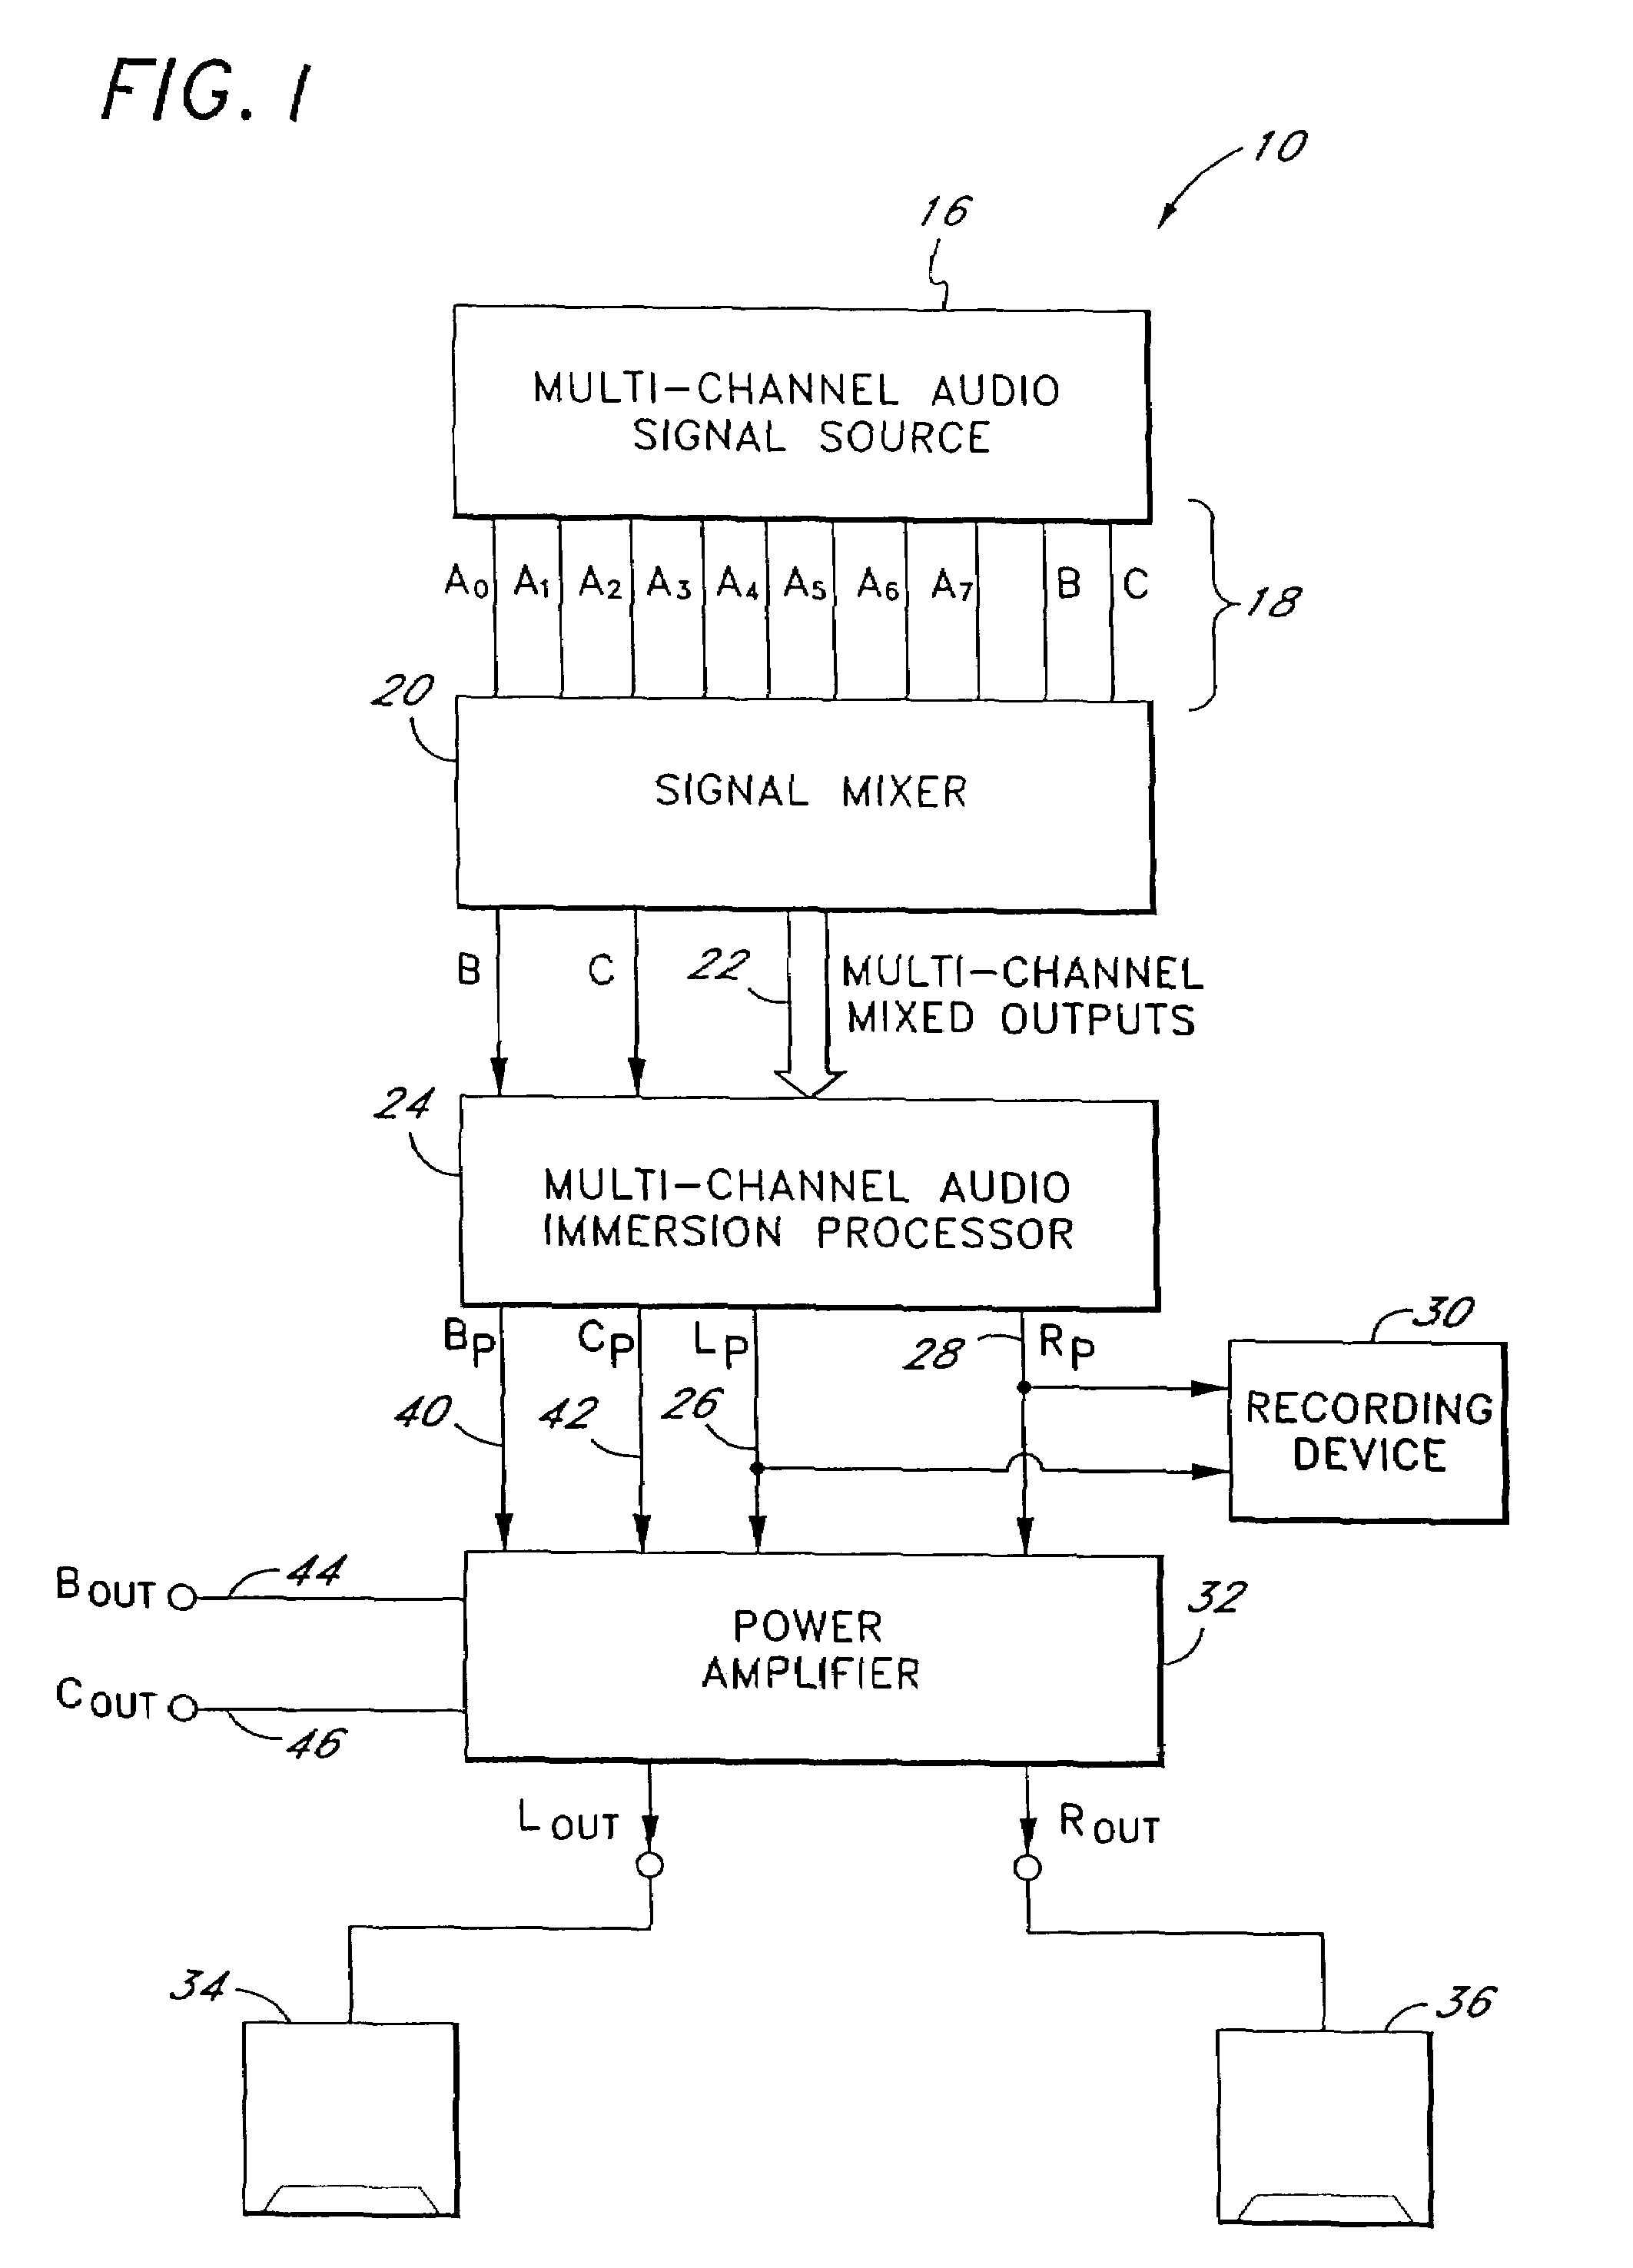 Multi-channel audio enhancement system for use in recording playback and methods for providing same